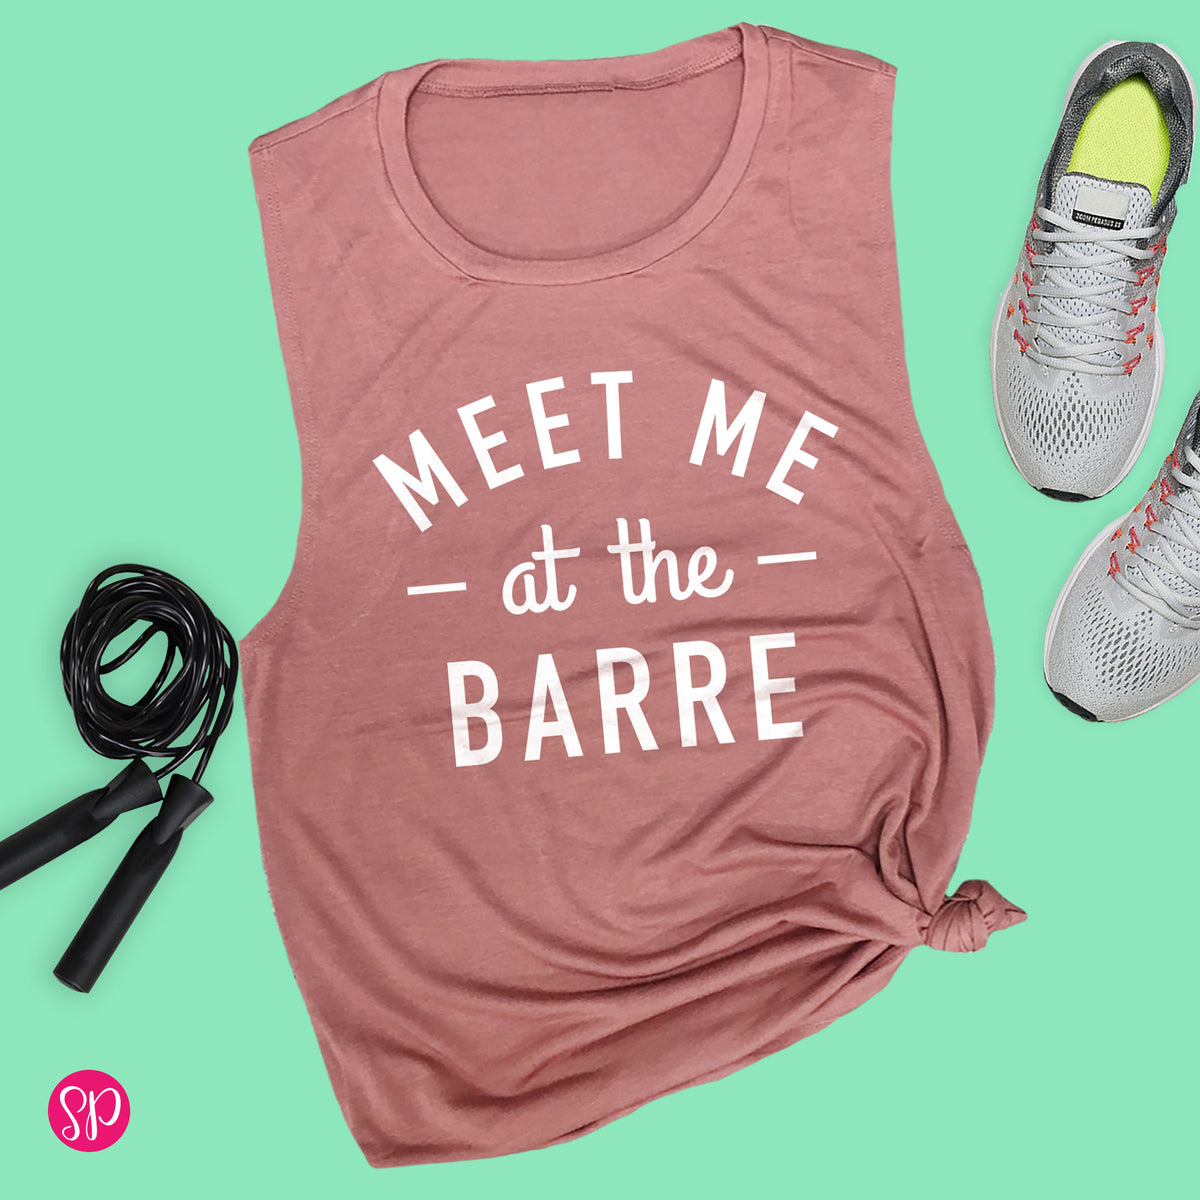 Meet Me at the Barre Workout Fitness Shirt Tank Top for Women